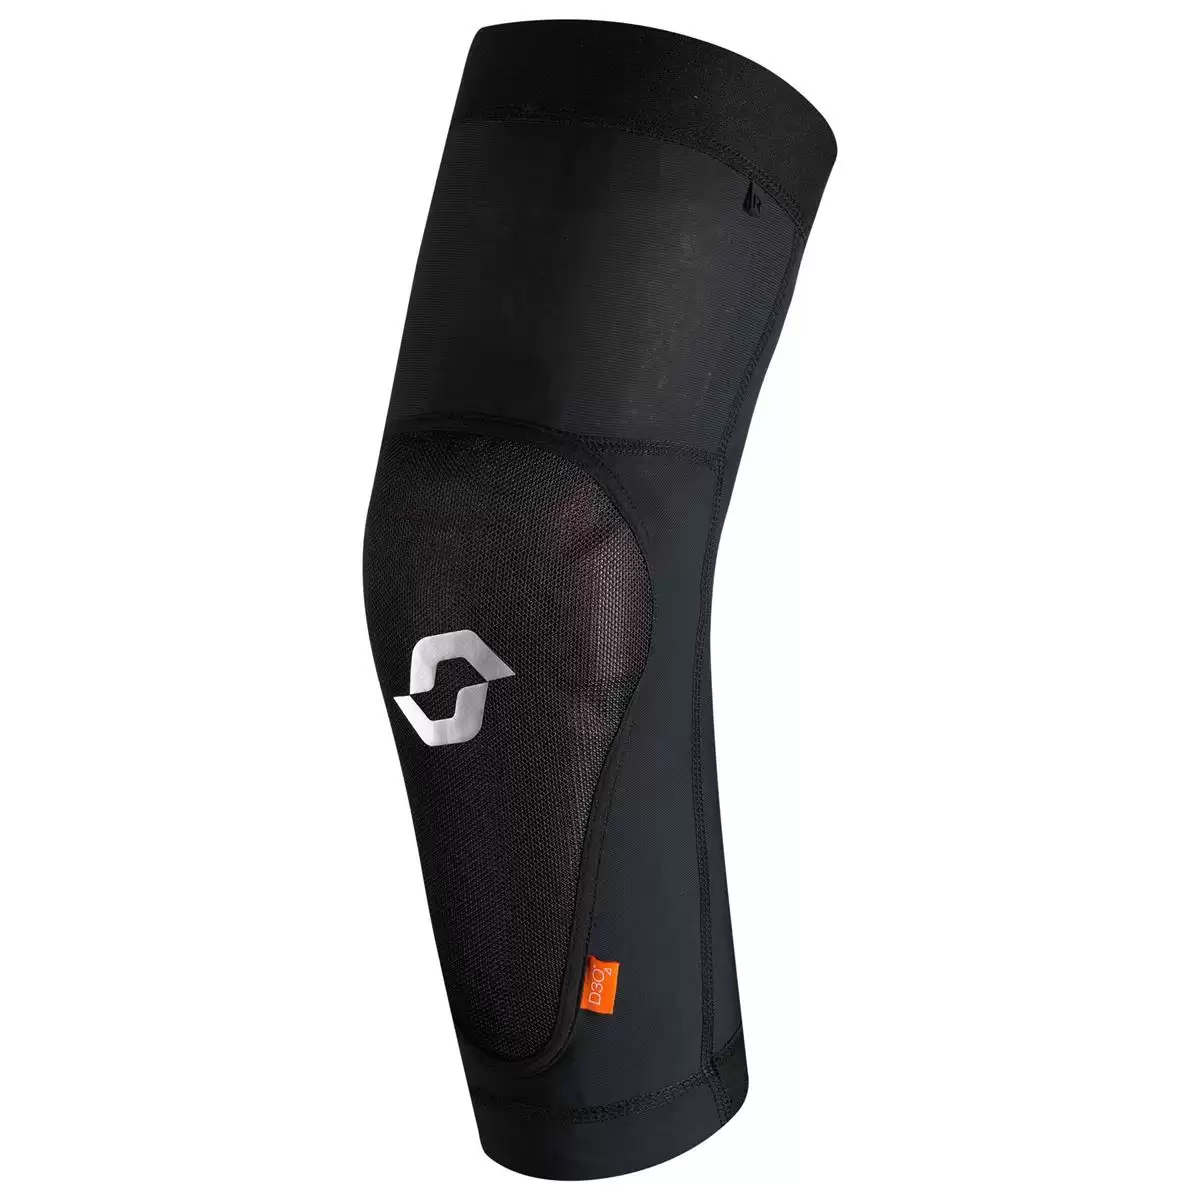 Elbow guards Softcon 2 Black/Grey - Size L - image